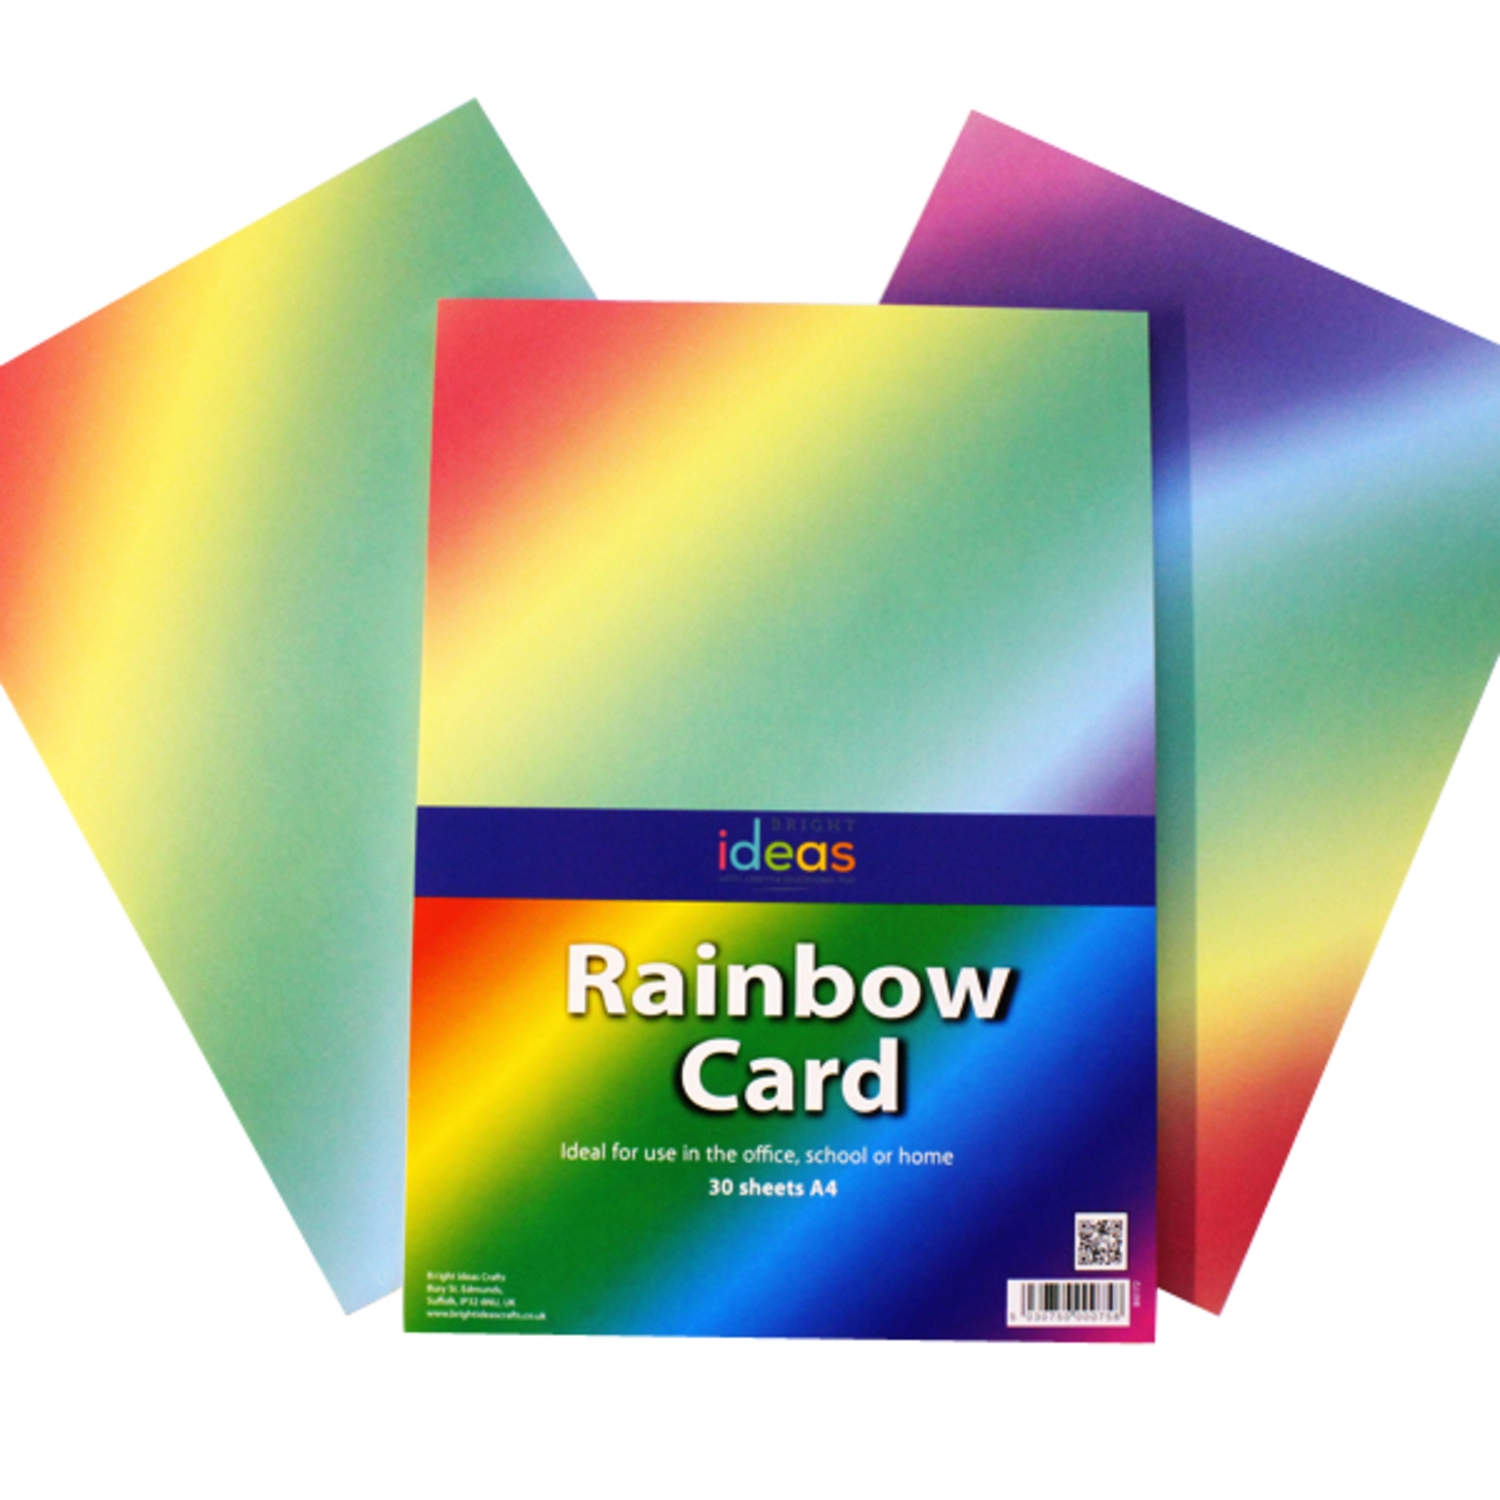 Rainbow Card. Colorful Cards handouts.